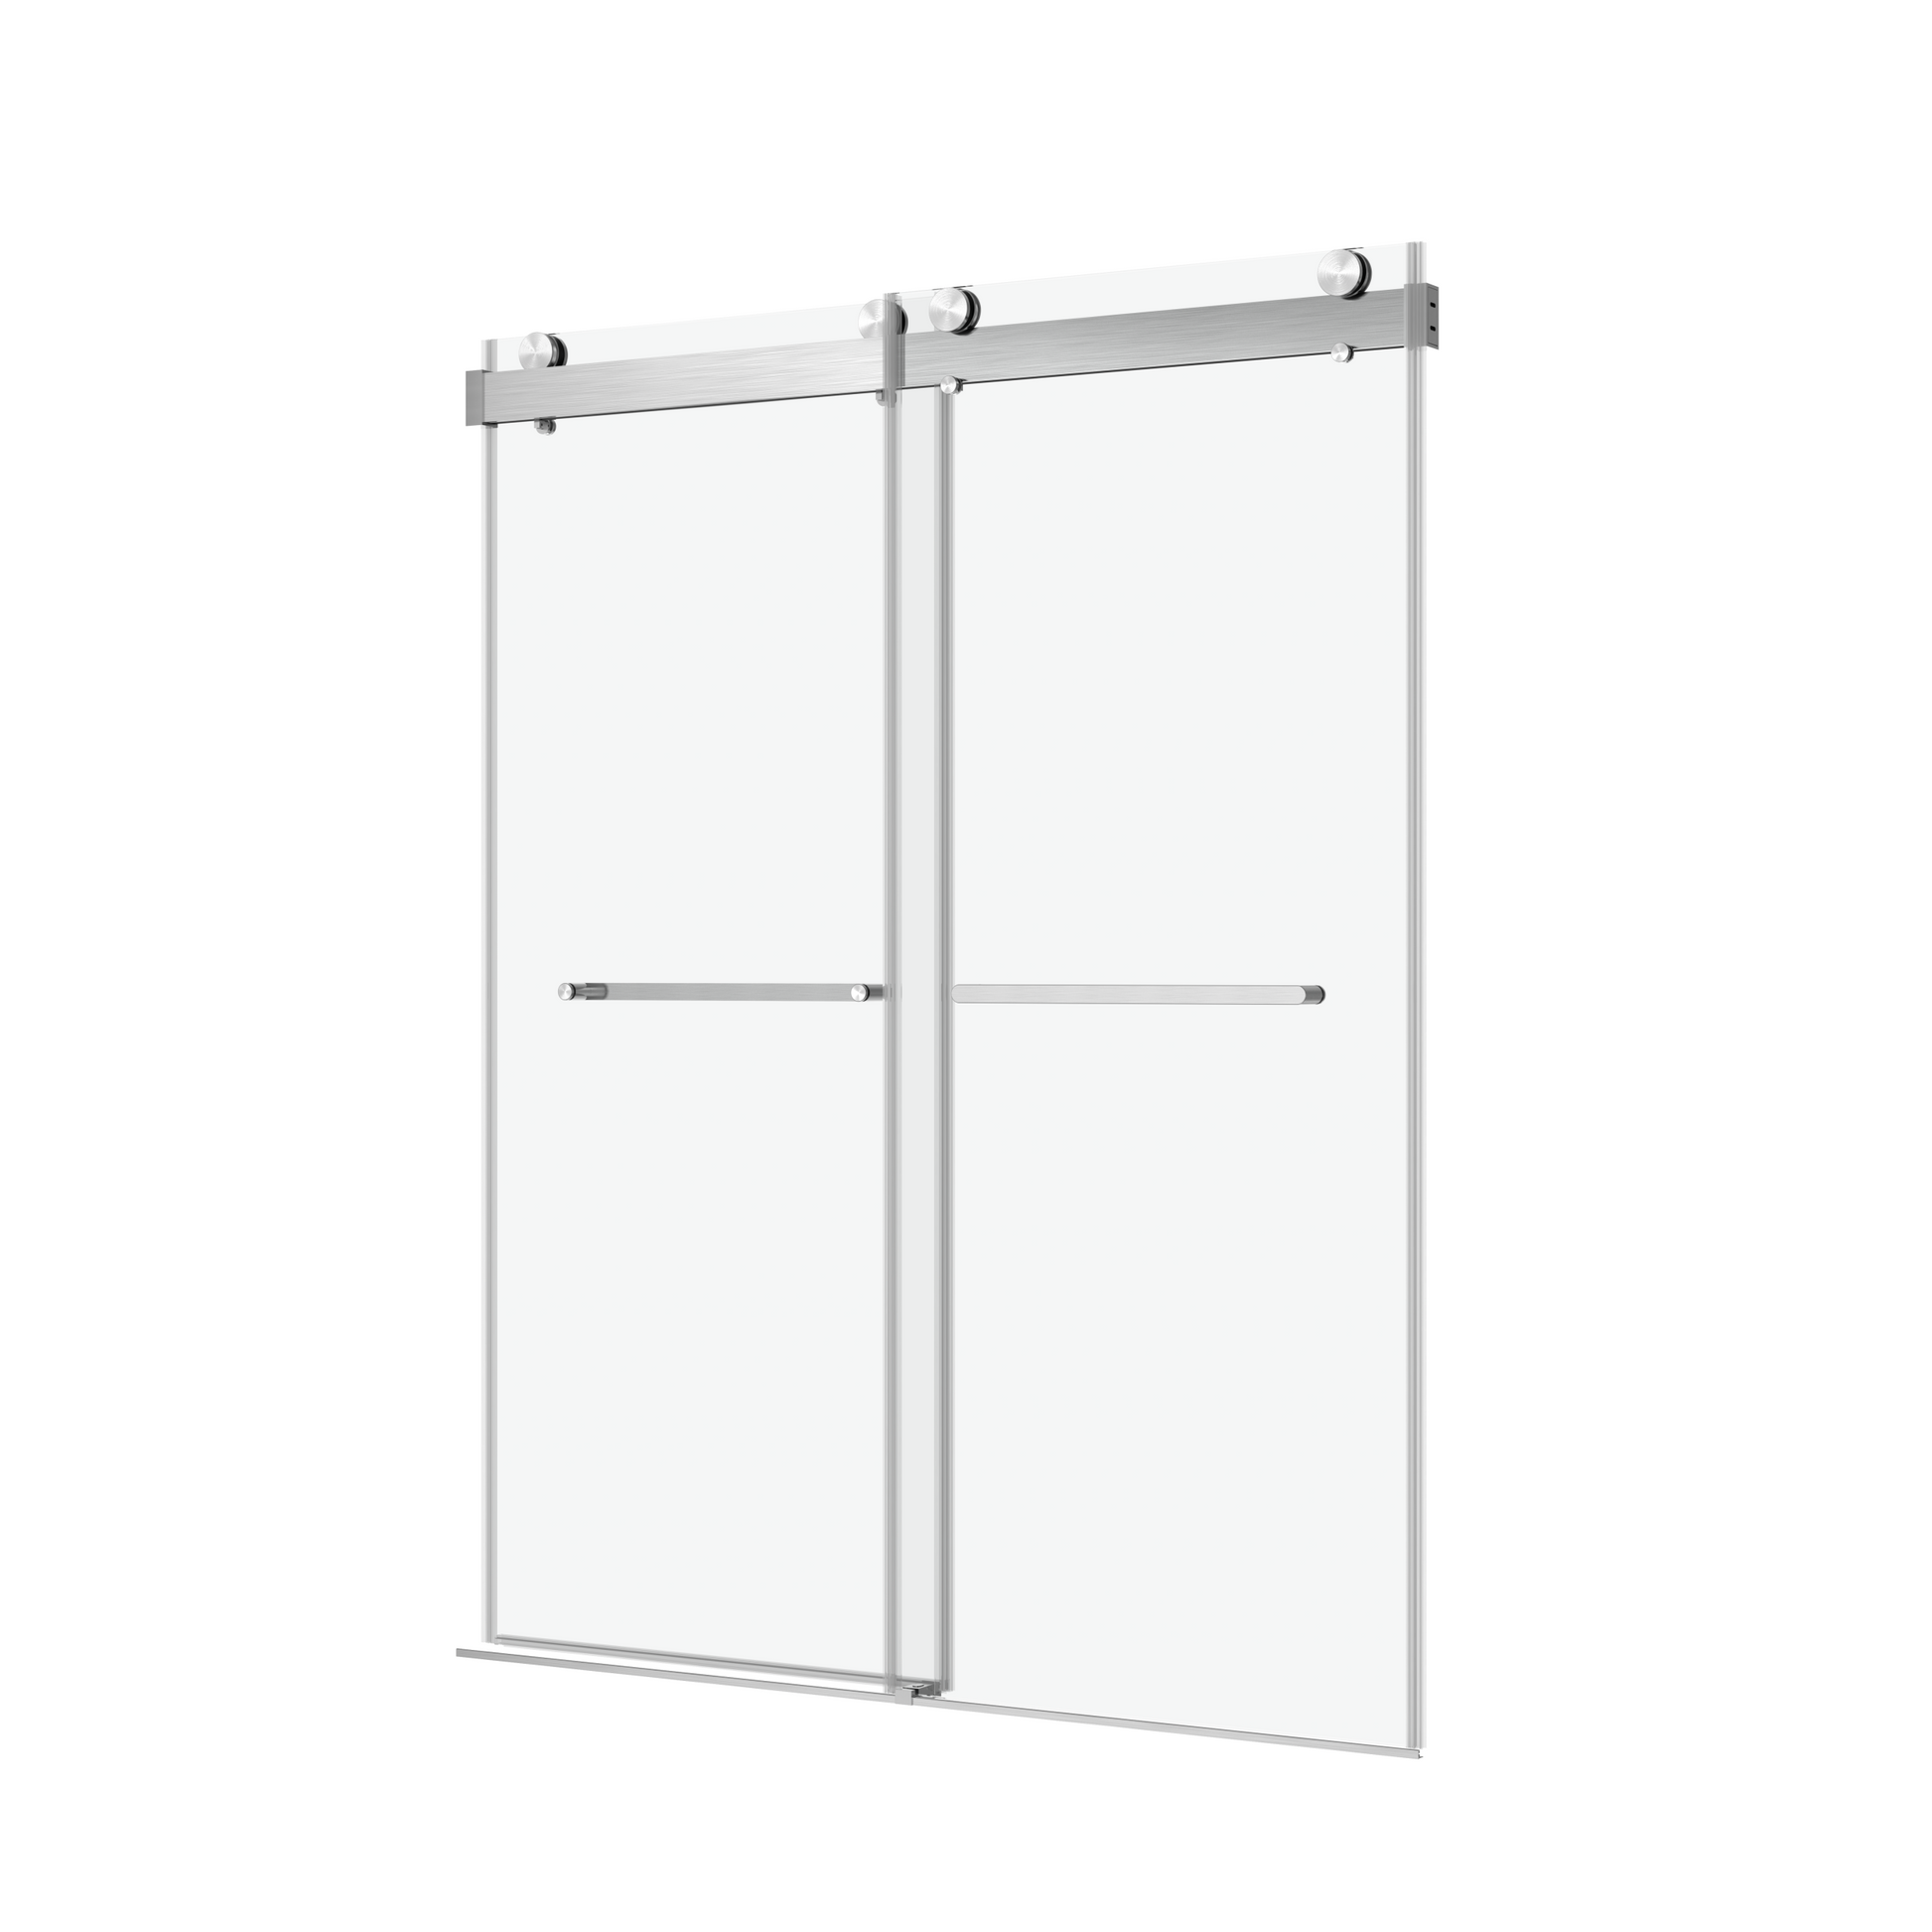 Elan 56 to 60 in. W x 76 in. H Sliding Frameless Soft brushed nickel-stainless steel-tempered